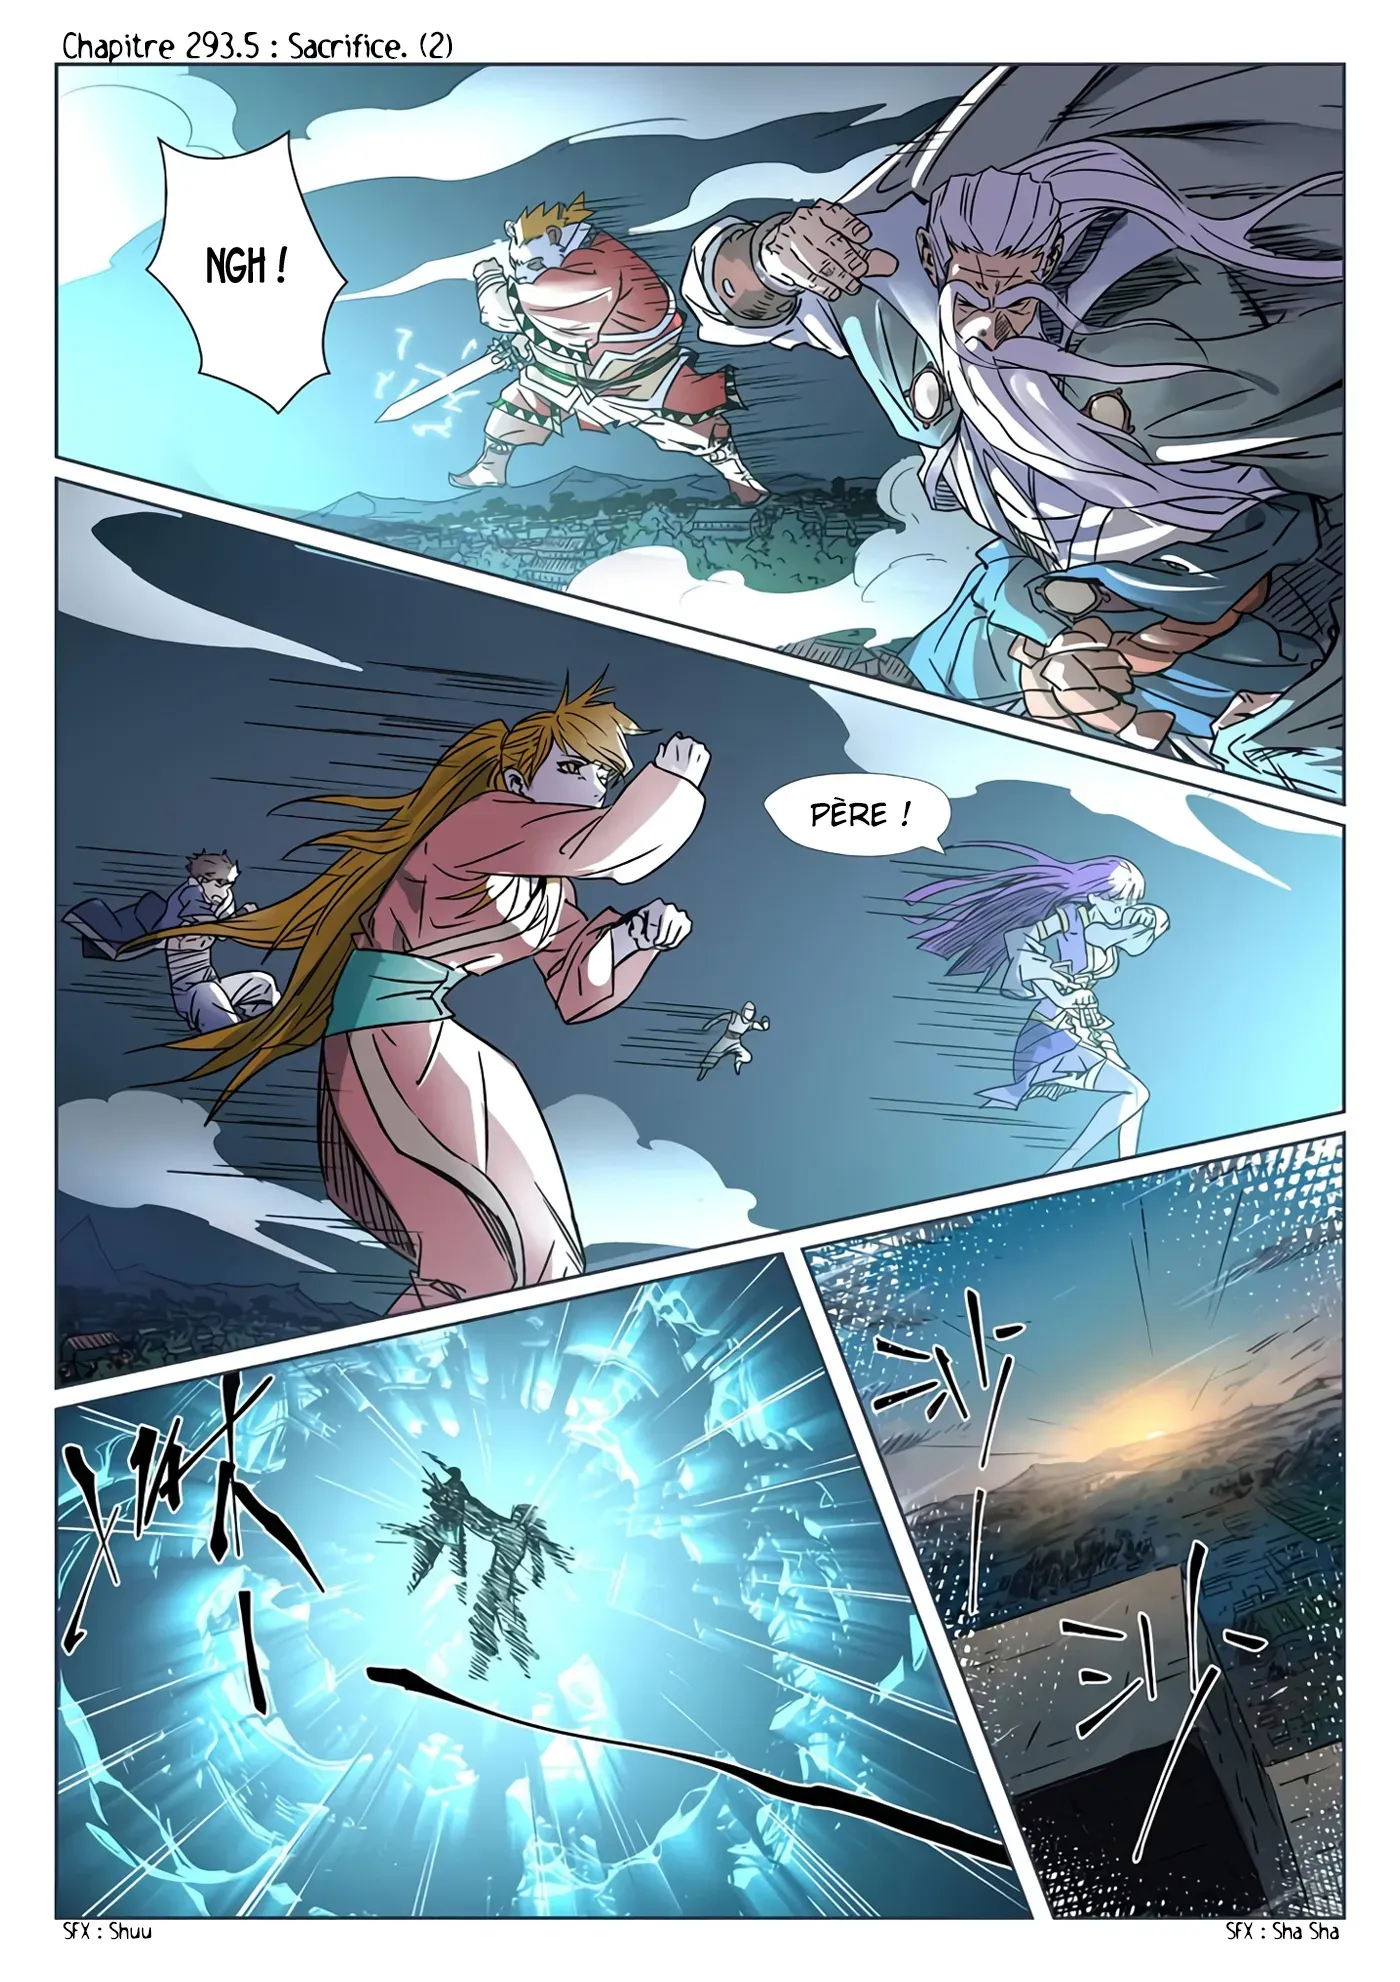 Tales Of Demons And Gods: Chapter chapitre-293.5 - Page 2